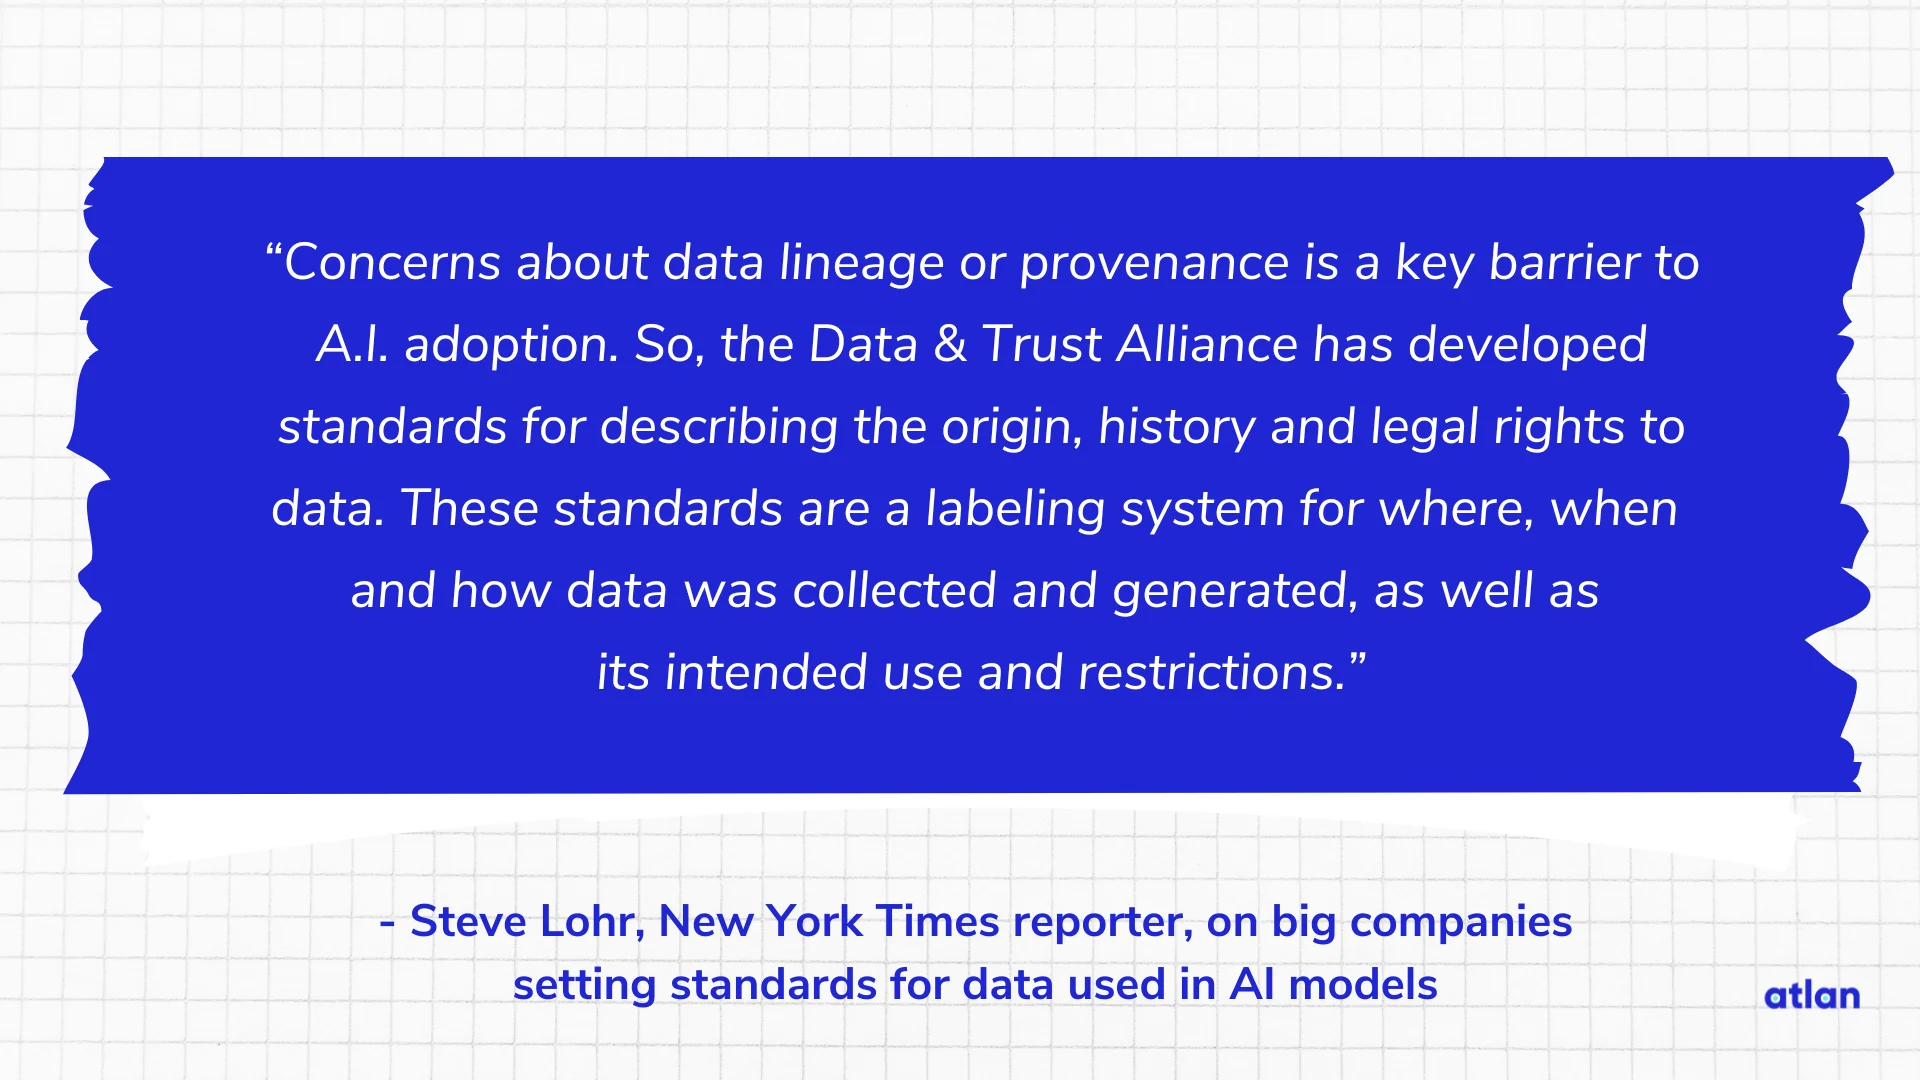 Steve Lohr, New York Times reporter, on big companies setting standards for data used in AI models